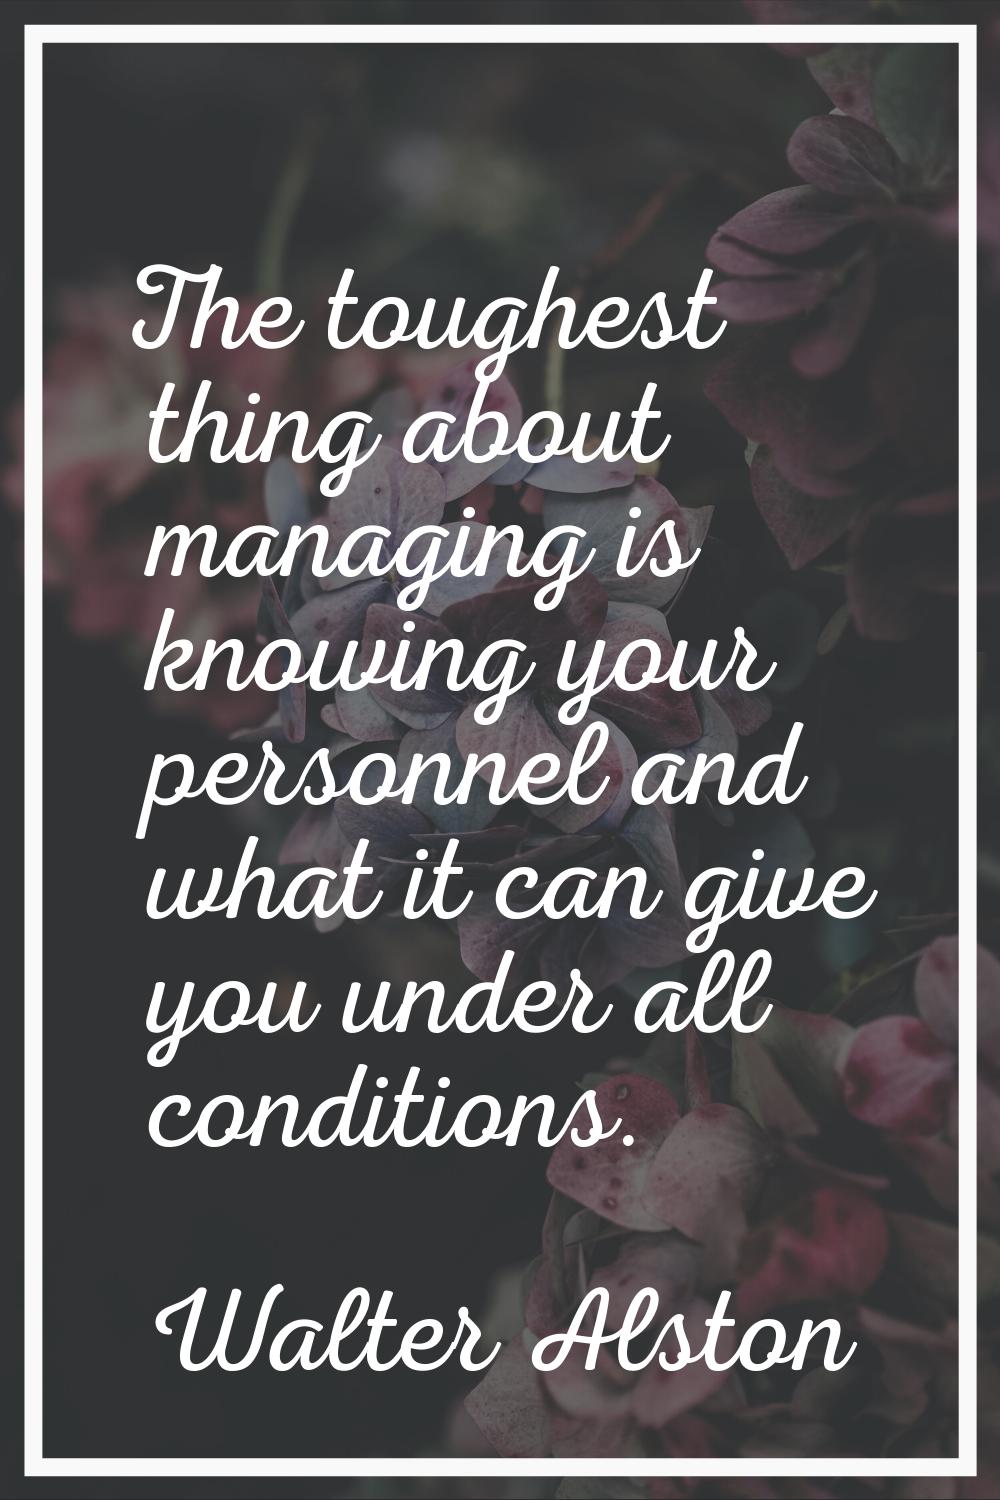 The toughest thing about managing is knowing your personnel and what it can give you under all cond